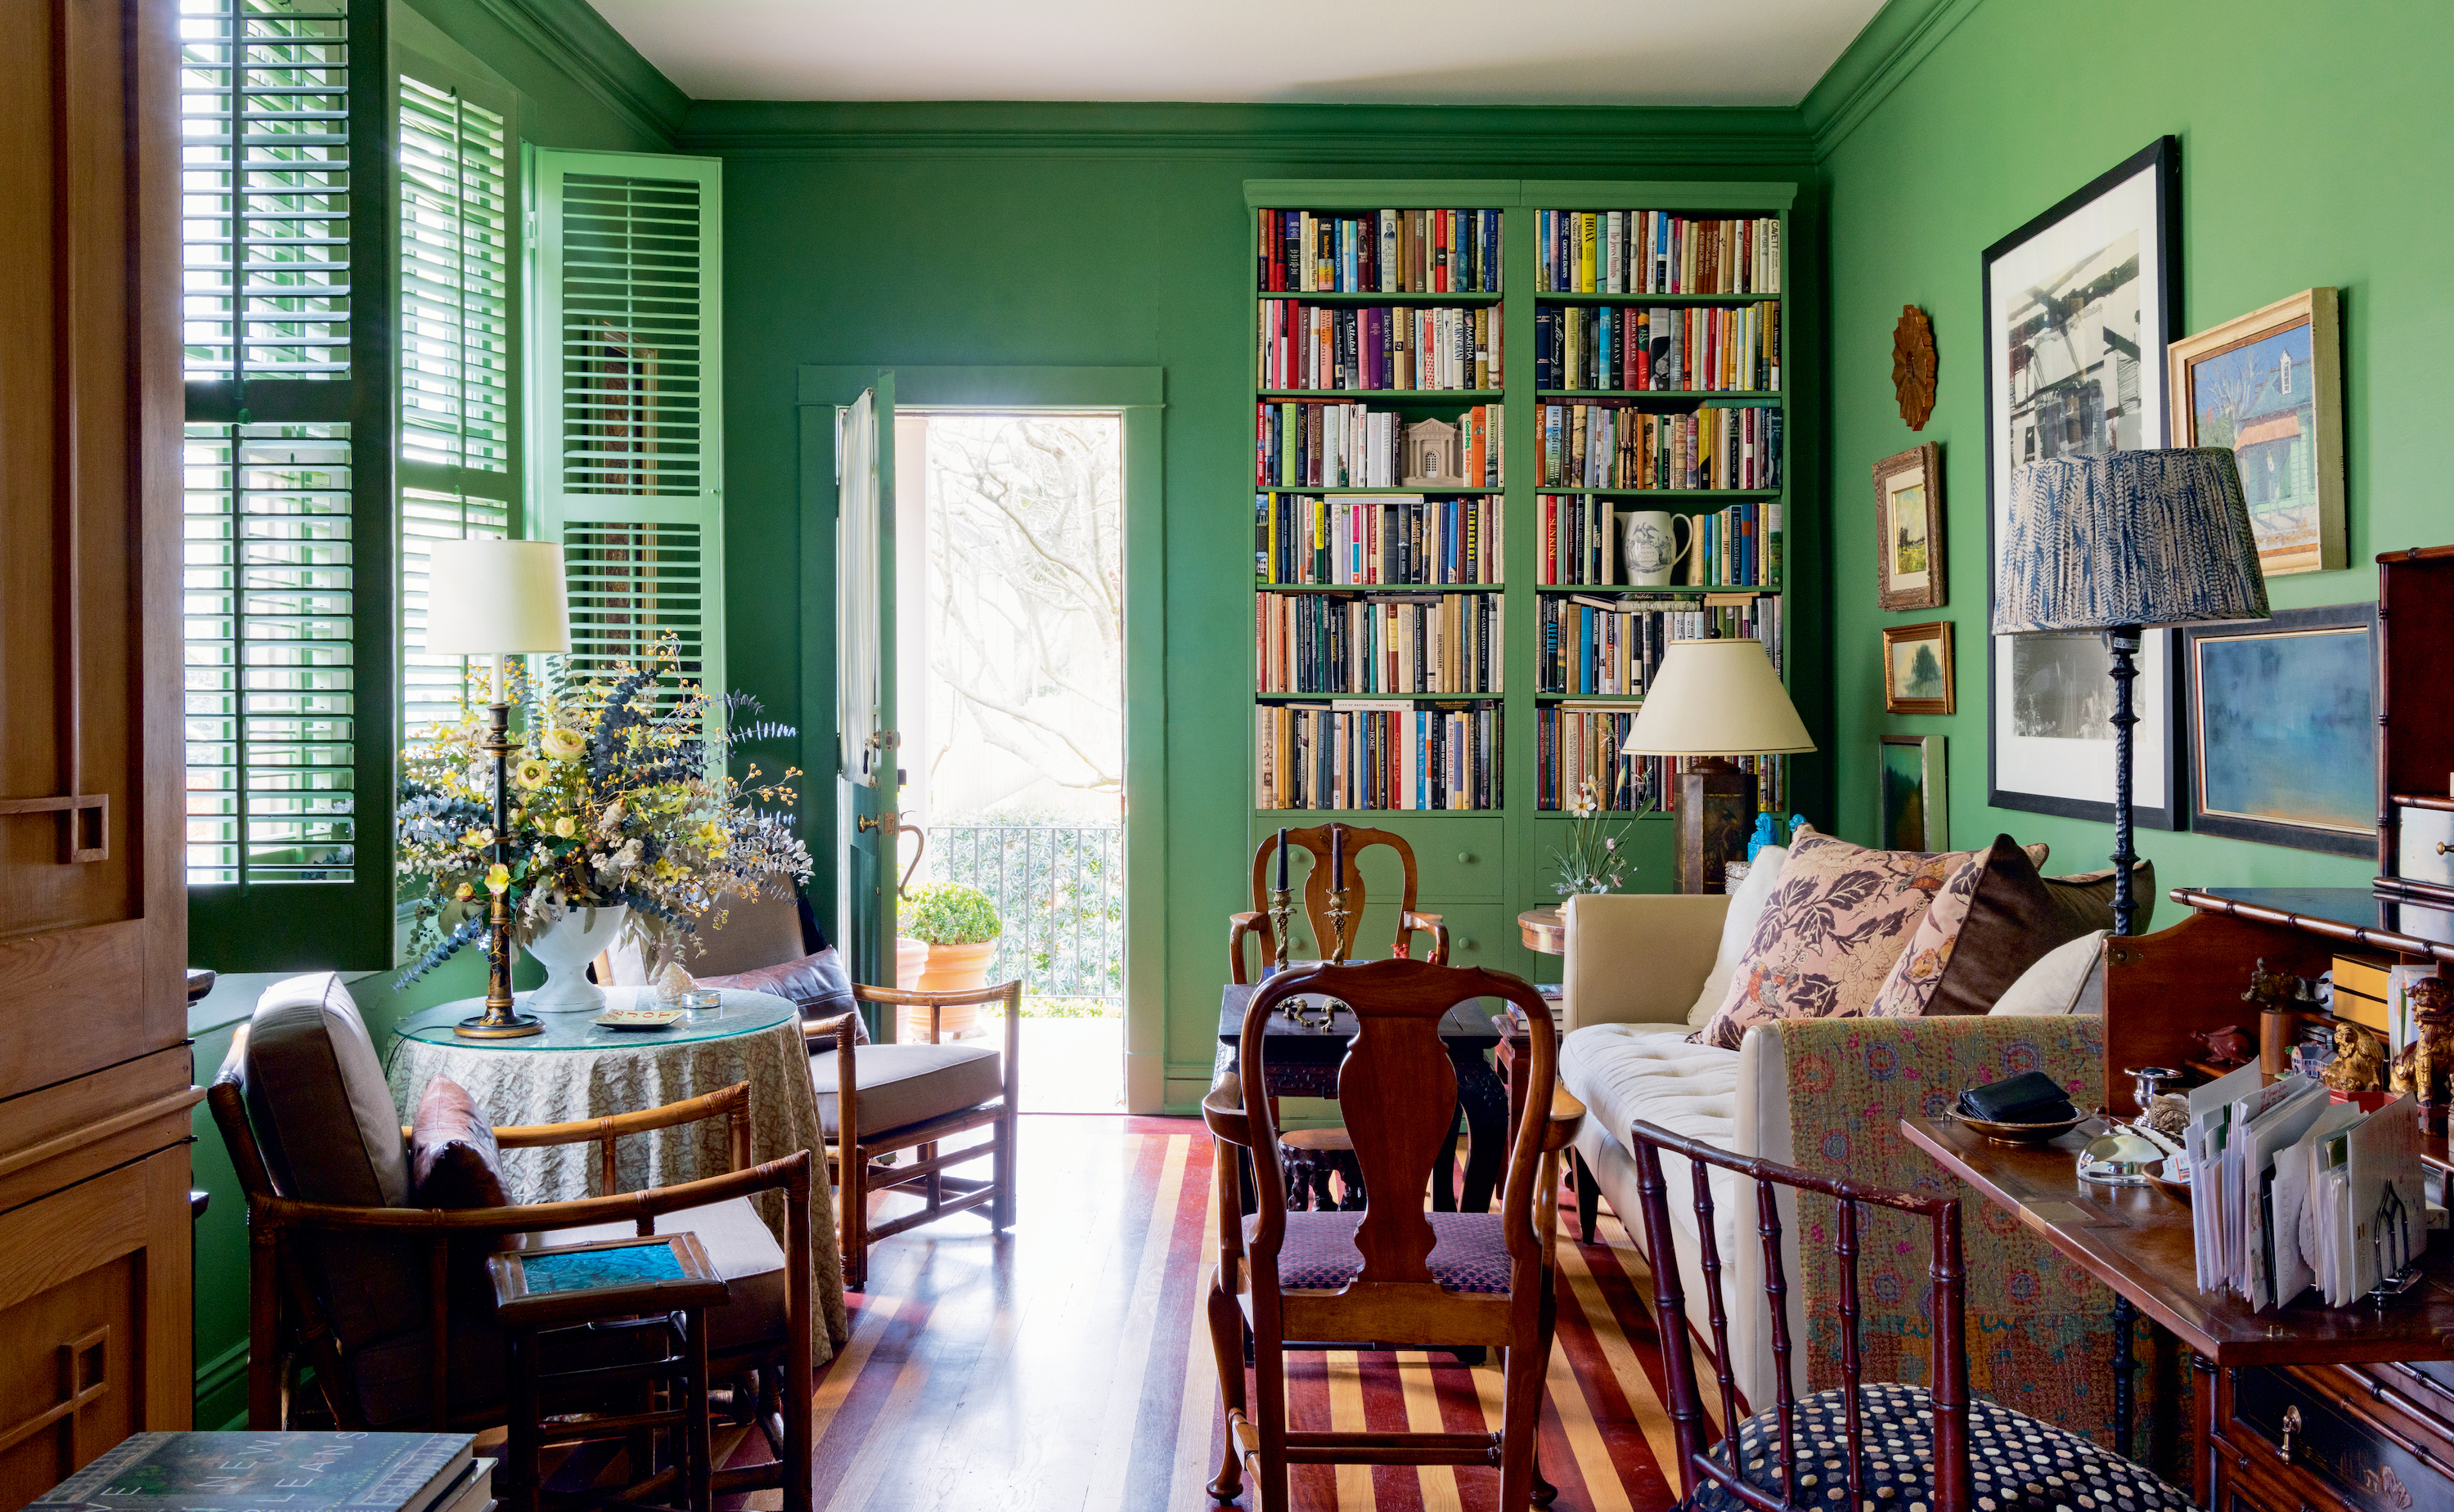 An emerald green room with a striped wood floor and open windows.